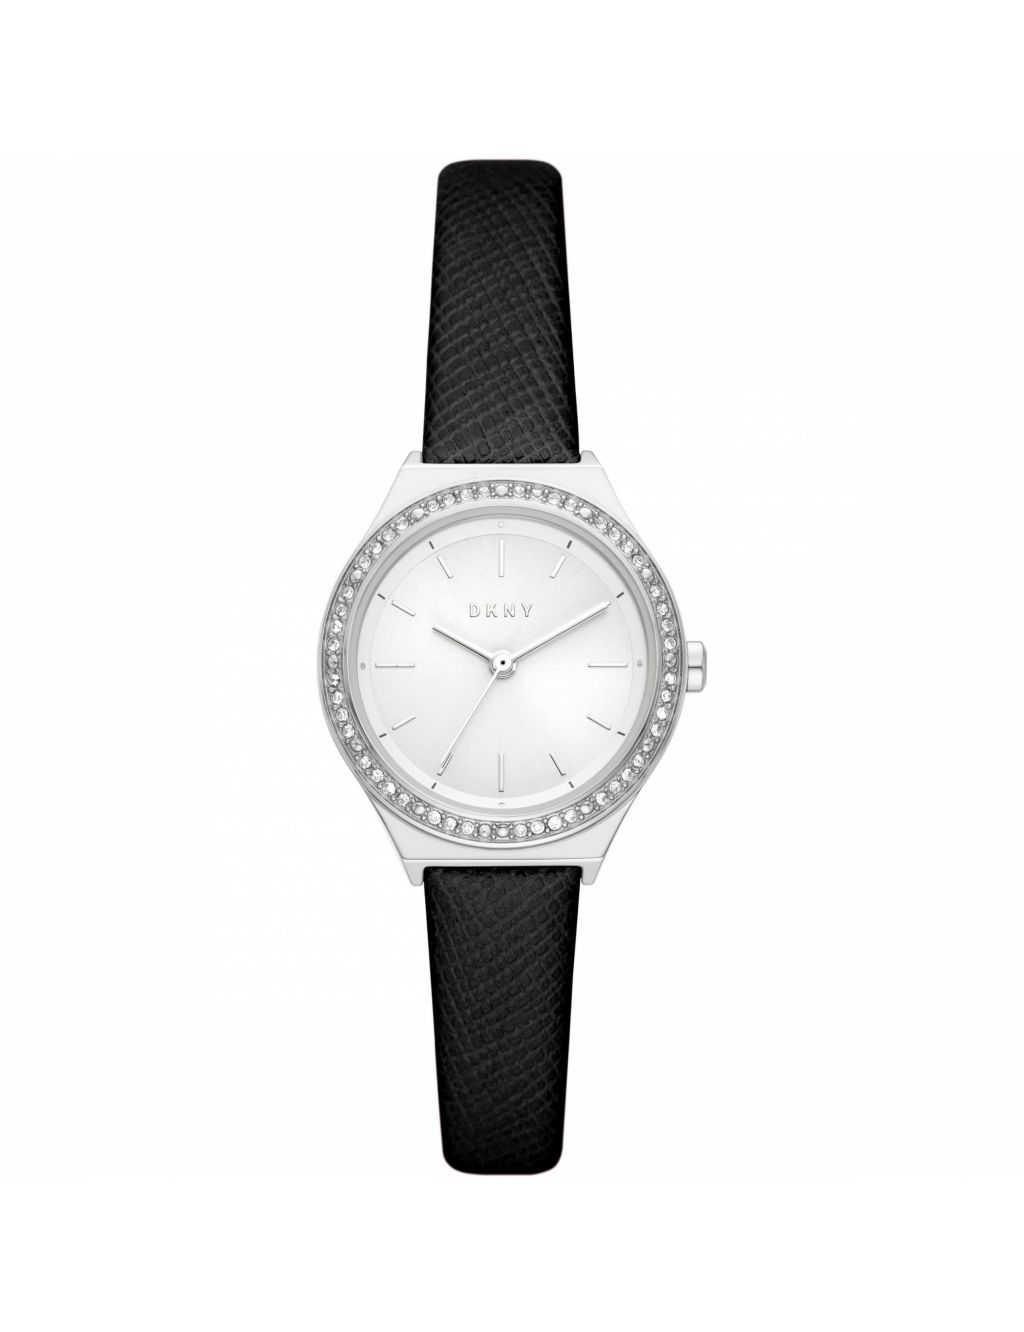 DKNY Parsons Black Leather Watch image 1